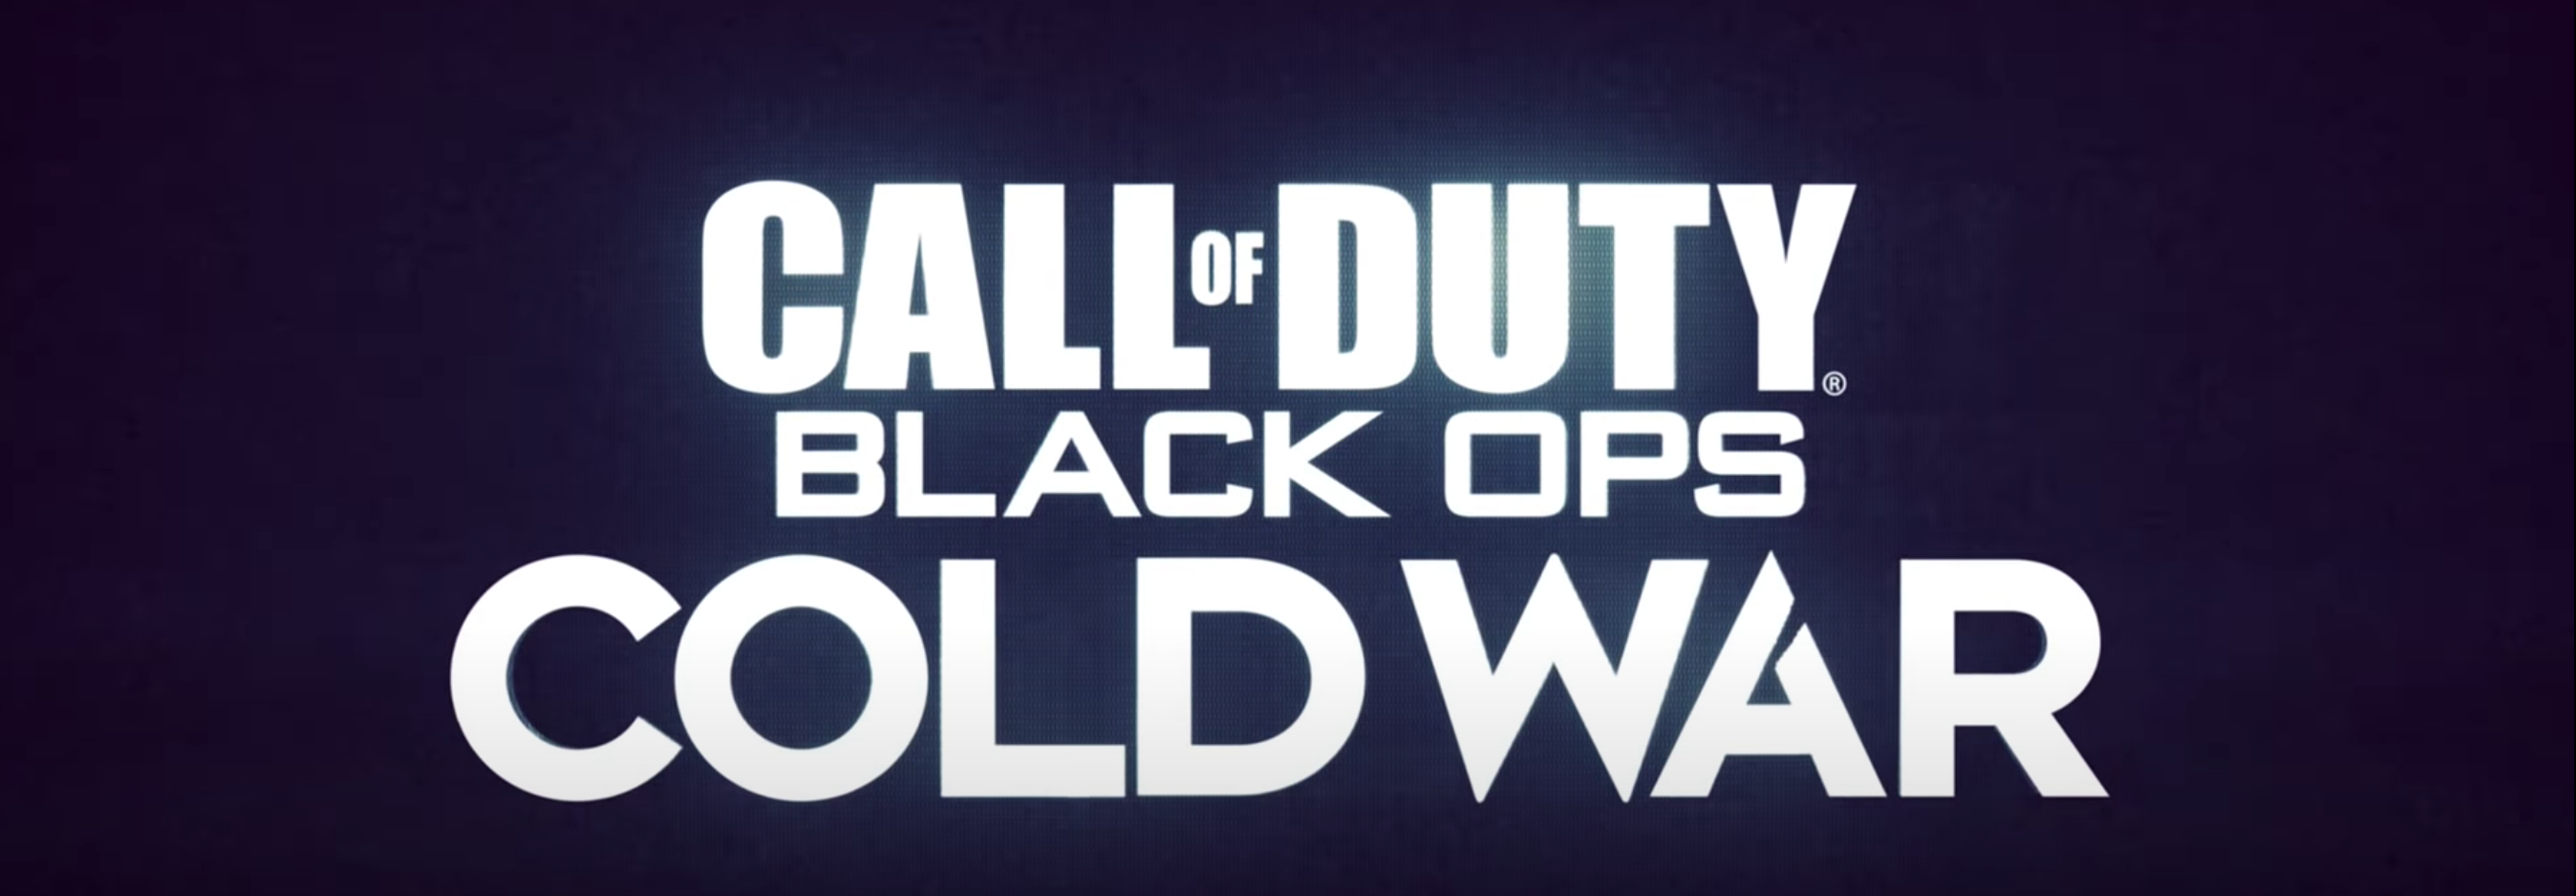 call of duty: black ops cold war sales numbers